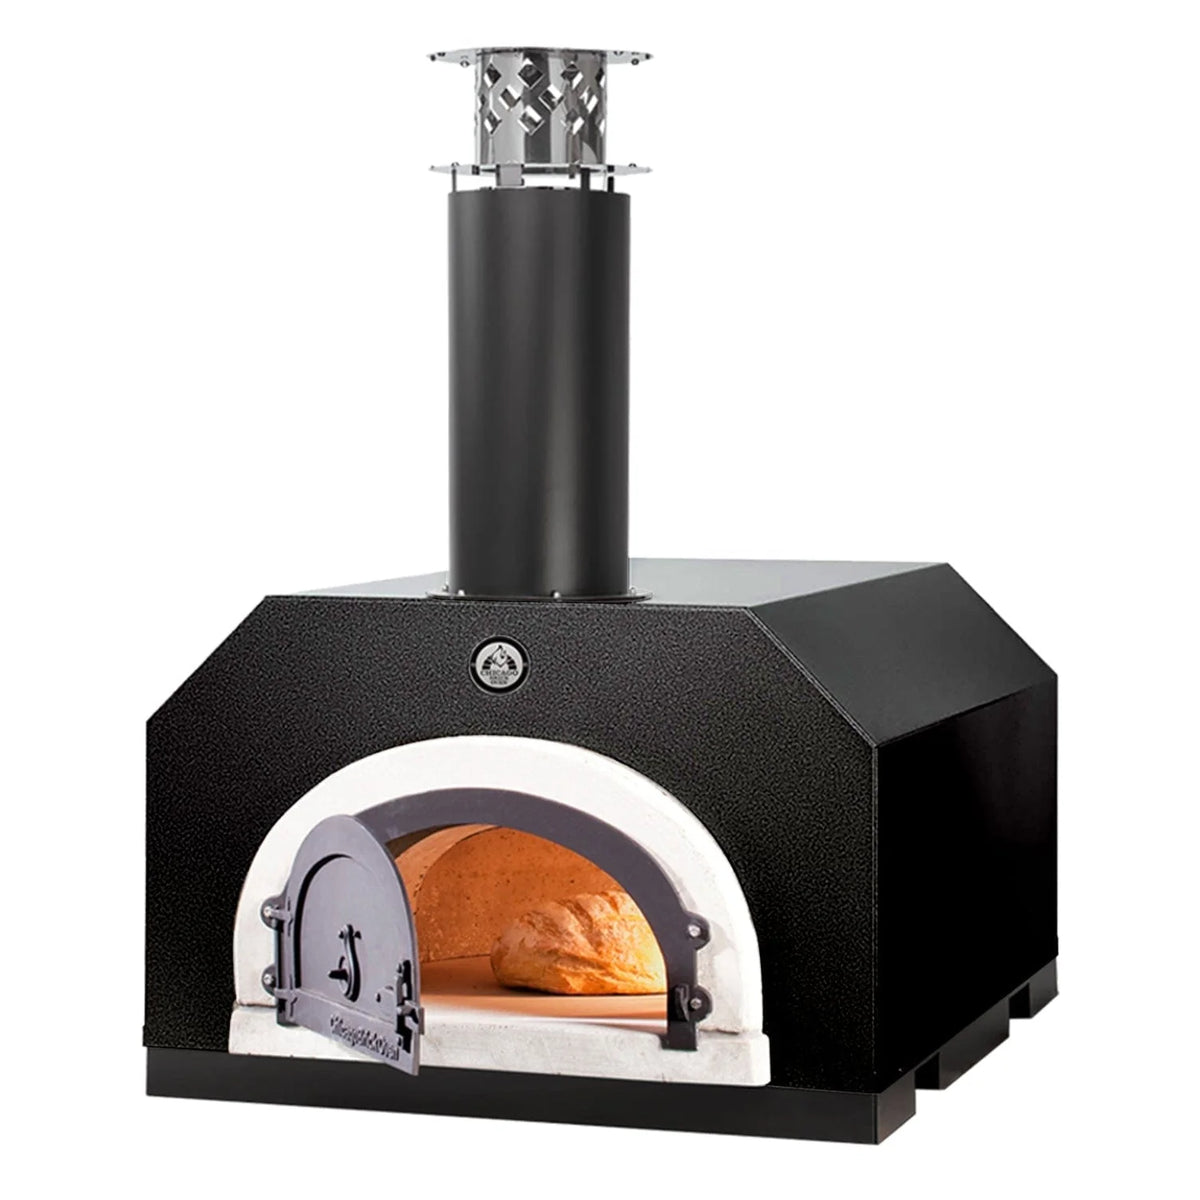 Chicago Brick Oven 34 1/4 Inch Countertop Wood Burning Pizza Oven